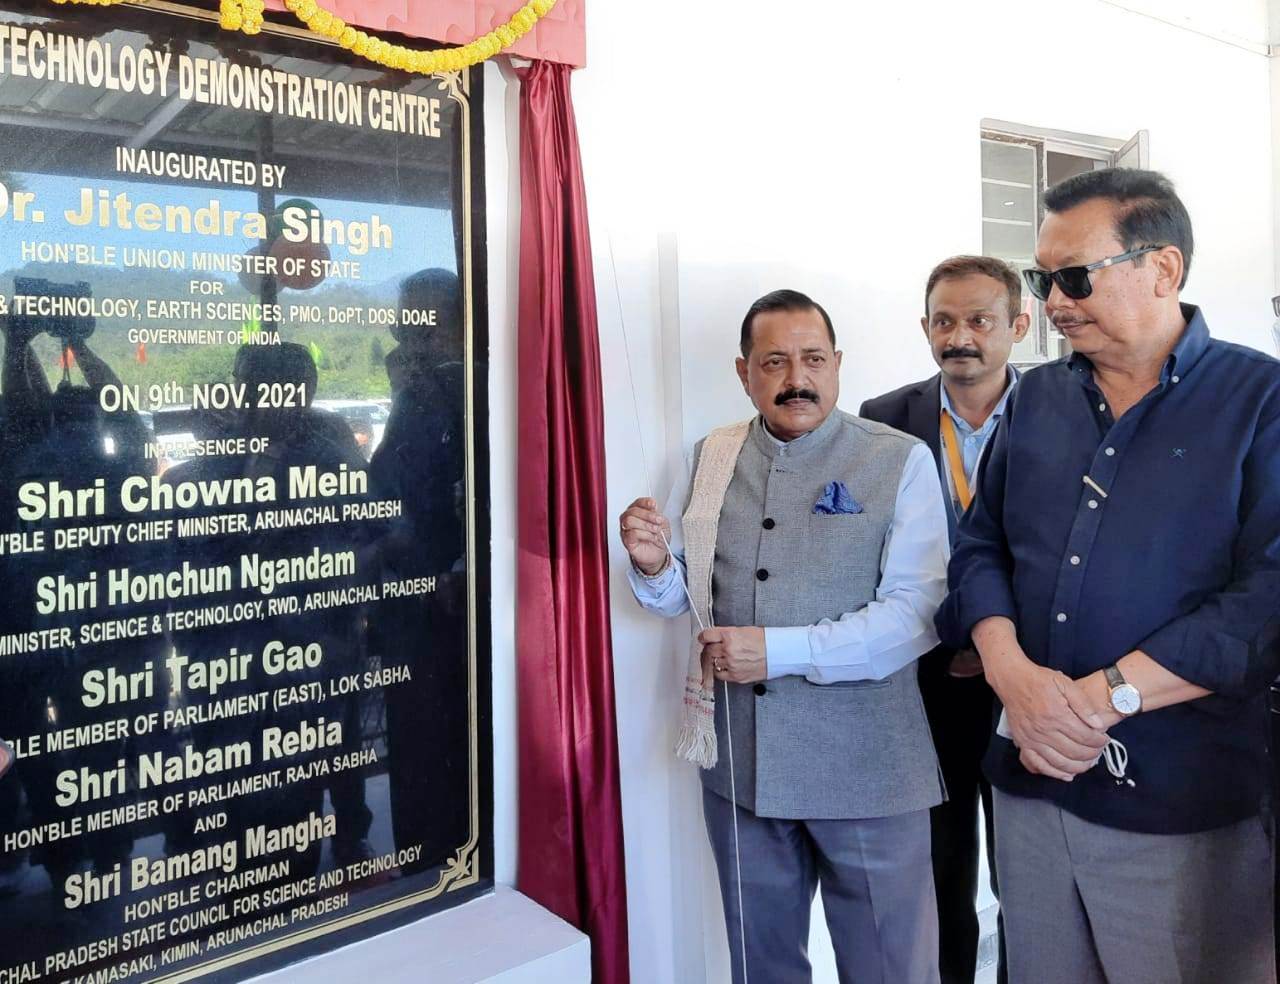  Dr.Jitendra Singh inaugurates a new Biotechnology Centre for Northeast tribals in remote area of AP